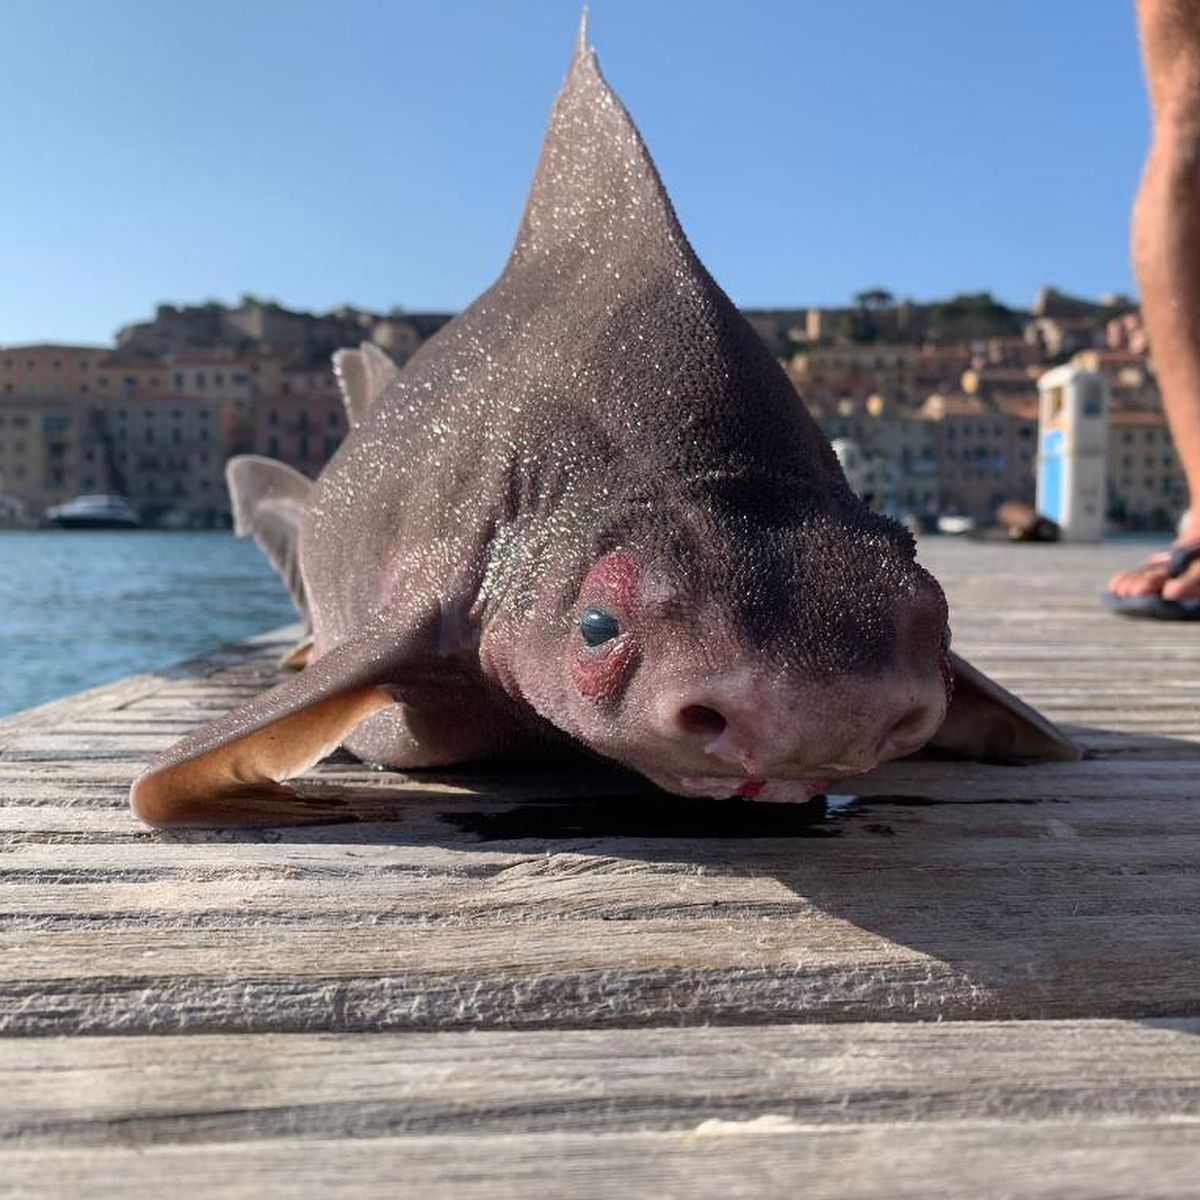 The sailors "freaked out" after finding an animal with the body of a shark and the face of a pig